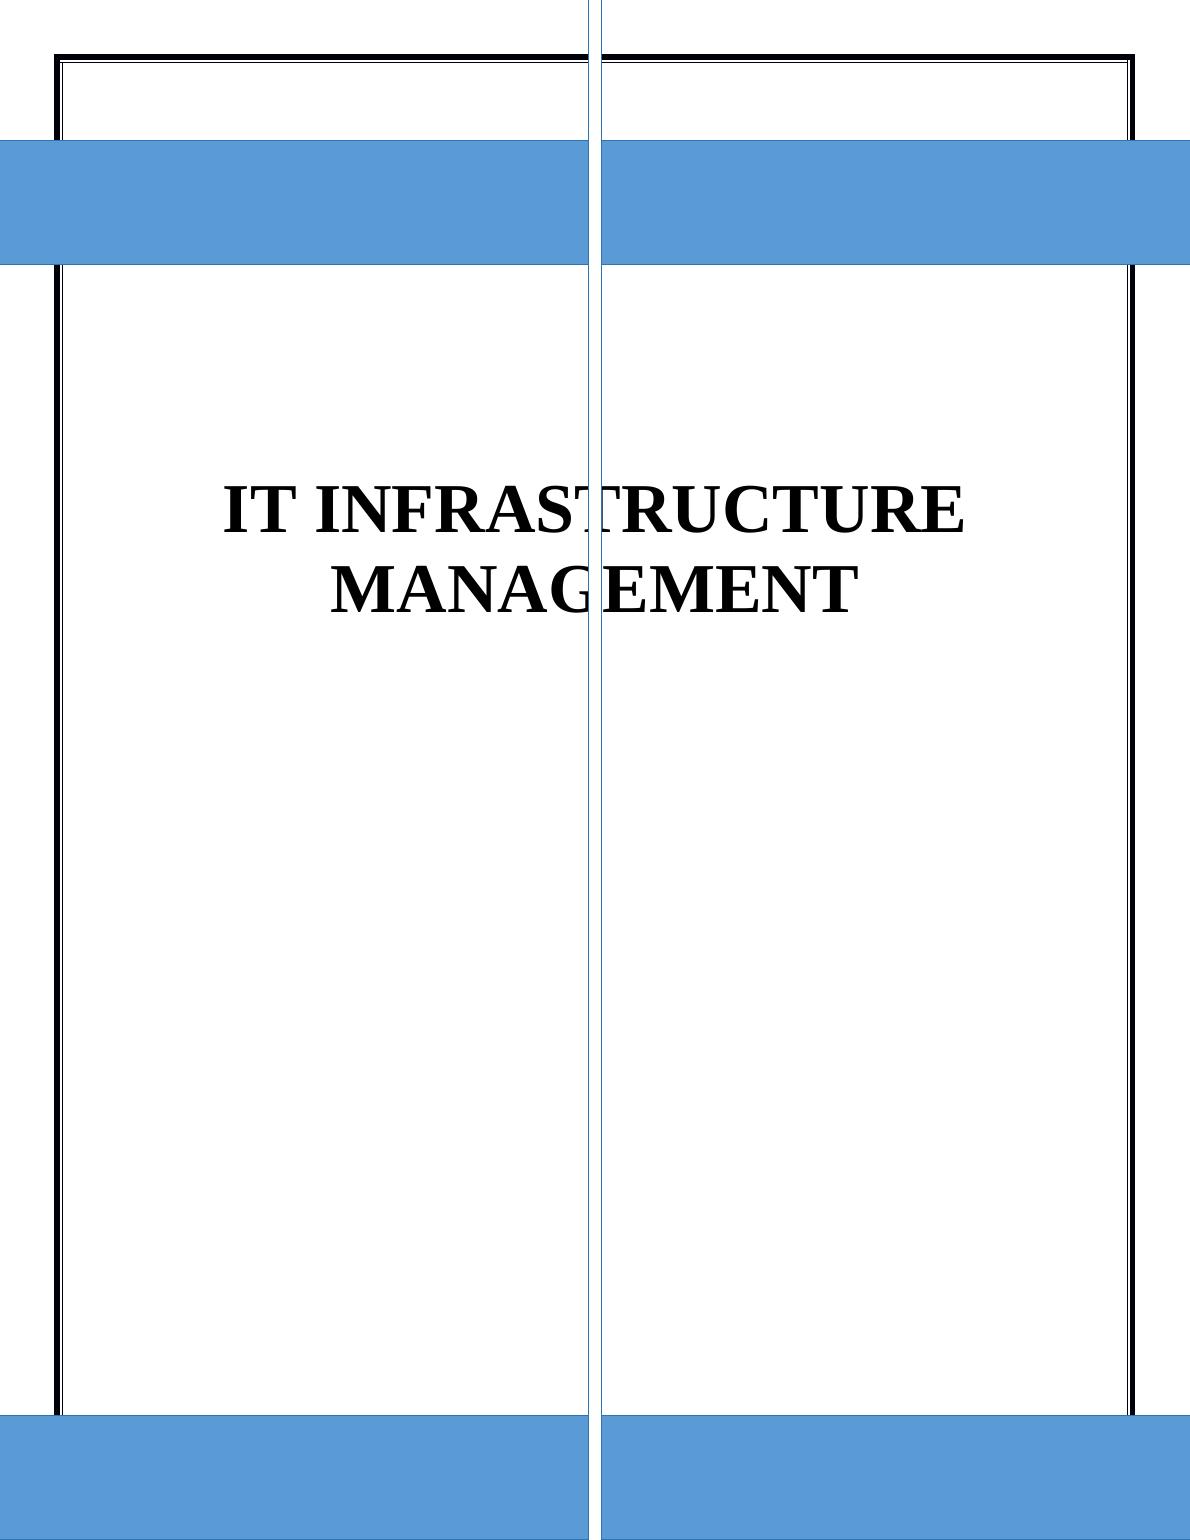 IT Infrastructure  Management   -  Sample Assignment_1